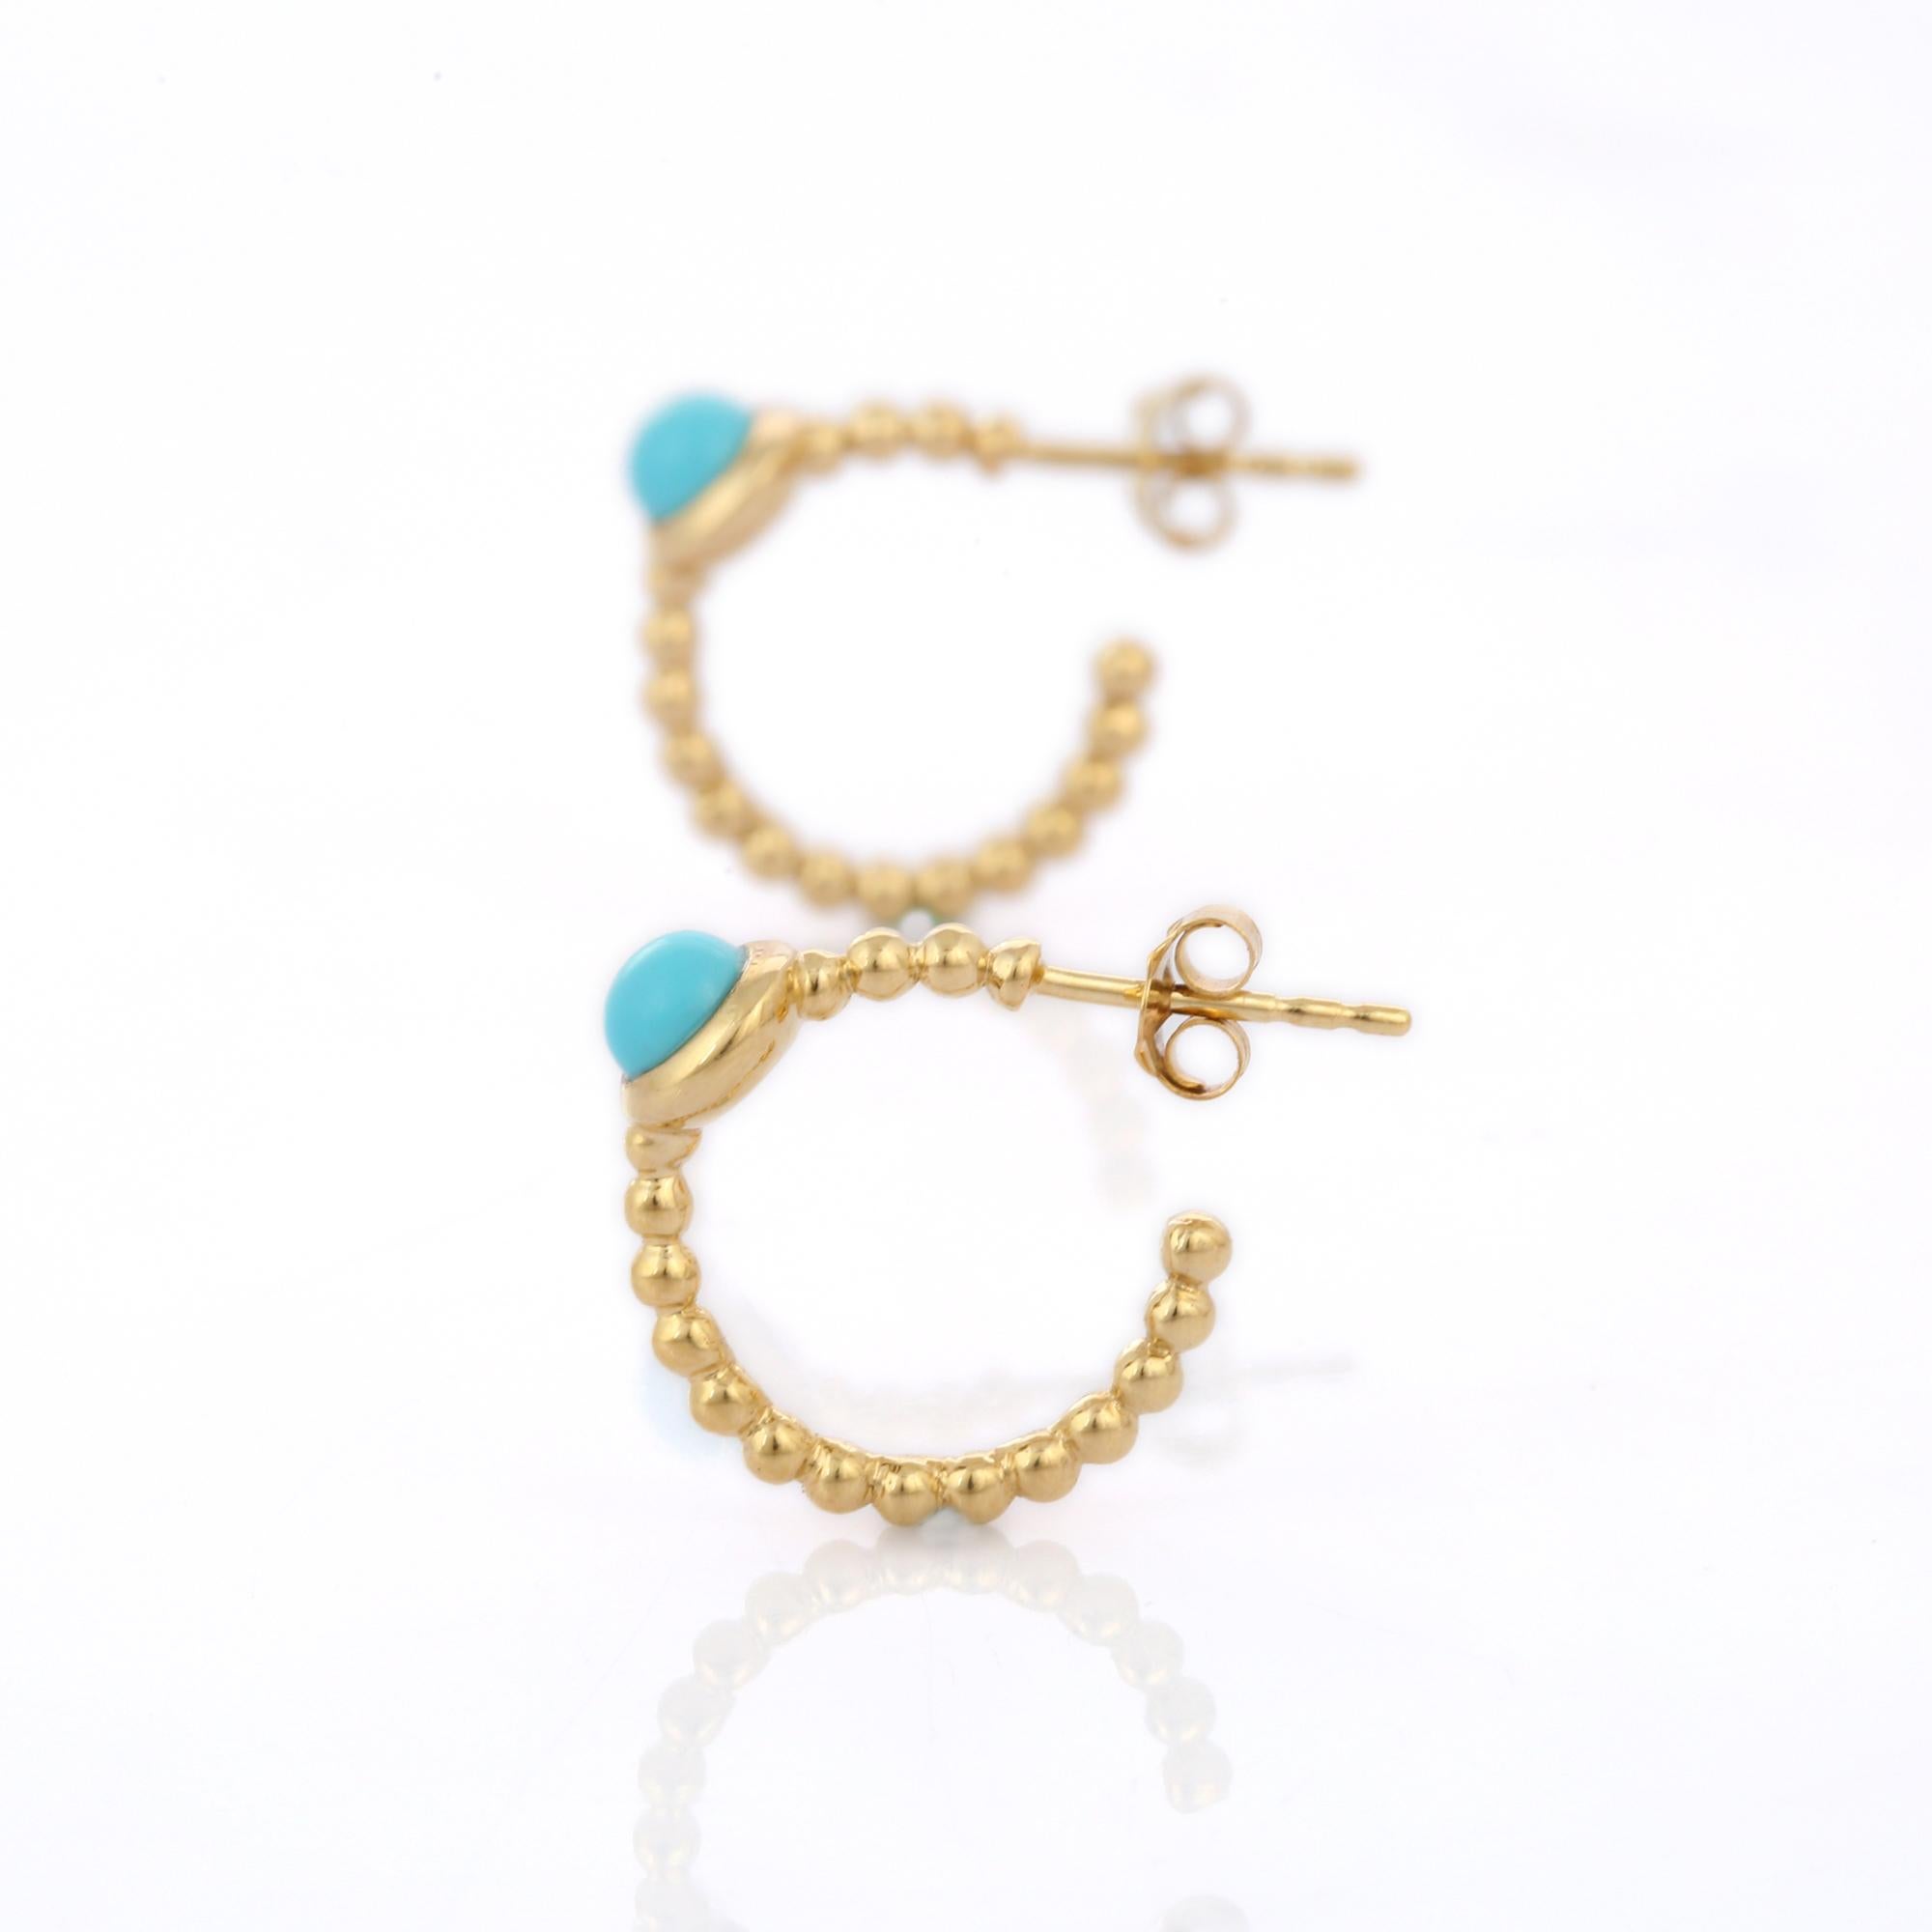 You shall need open hoop earrings to make a statement with your look. These earrings create a luxurious look featuring round cut turquoise.
If you love to gravitate towards unique styles, this piece of jewelry is perfect for you. 

PRODUCT DETAILS